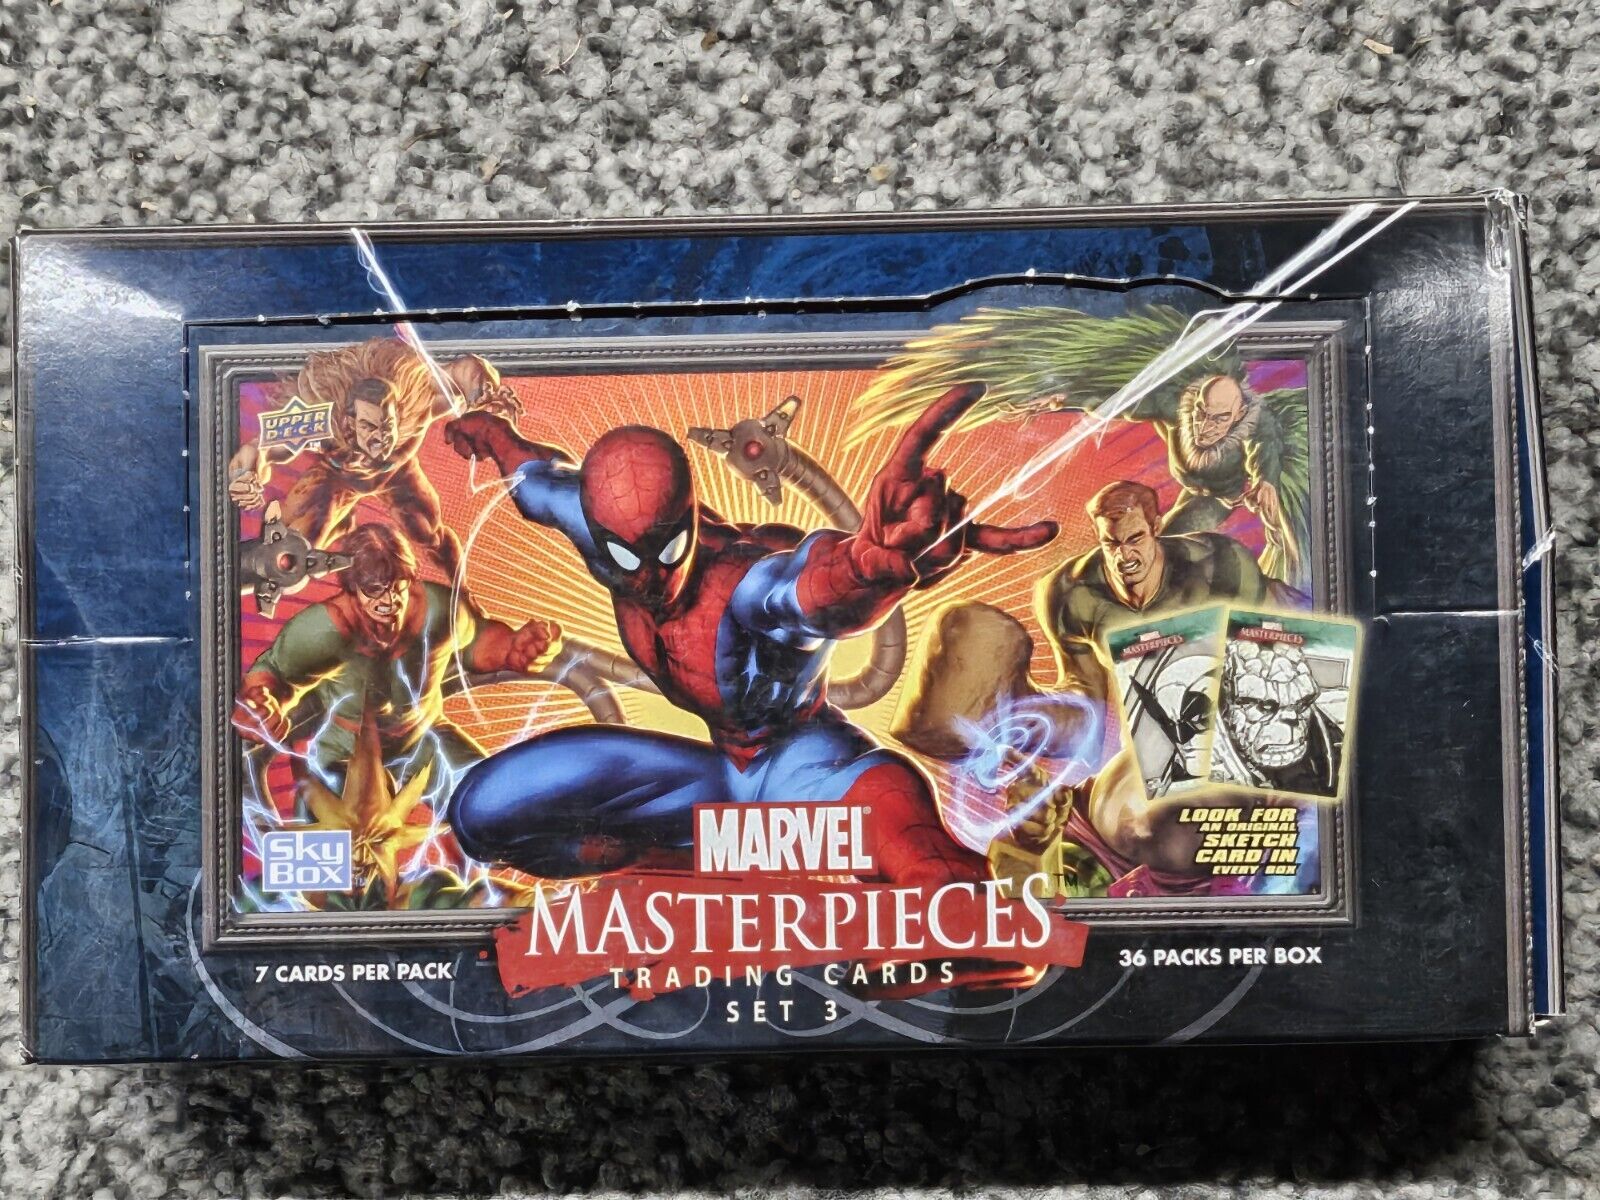 2008 Upper Deck Marvel Masterpieces Trading Cards All (36) Packs Sealed